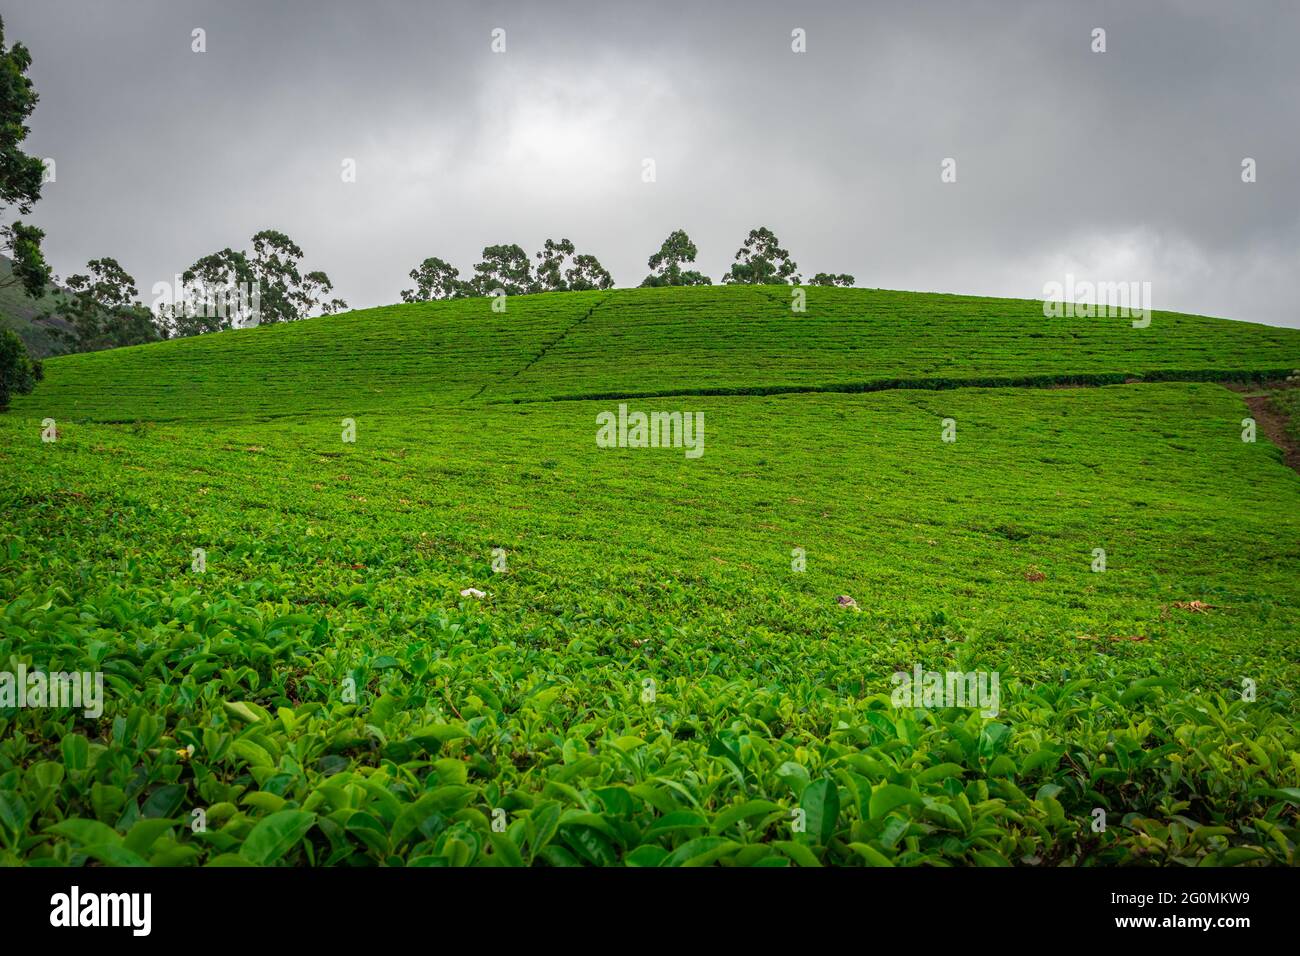 Tea gardens in the foothills of western ghat image take at India. The landscape is amazing with Green tea plantations in rows. Stock Photo